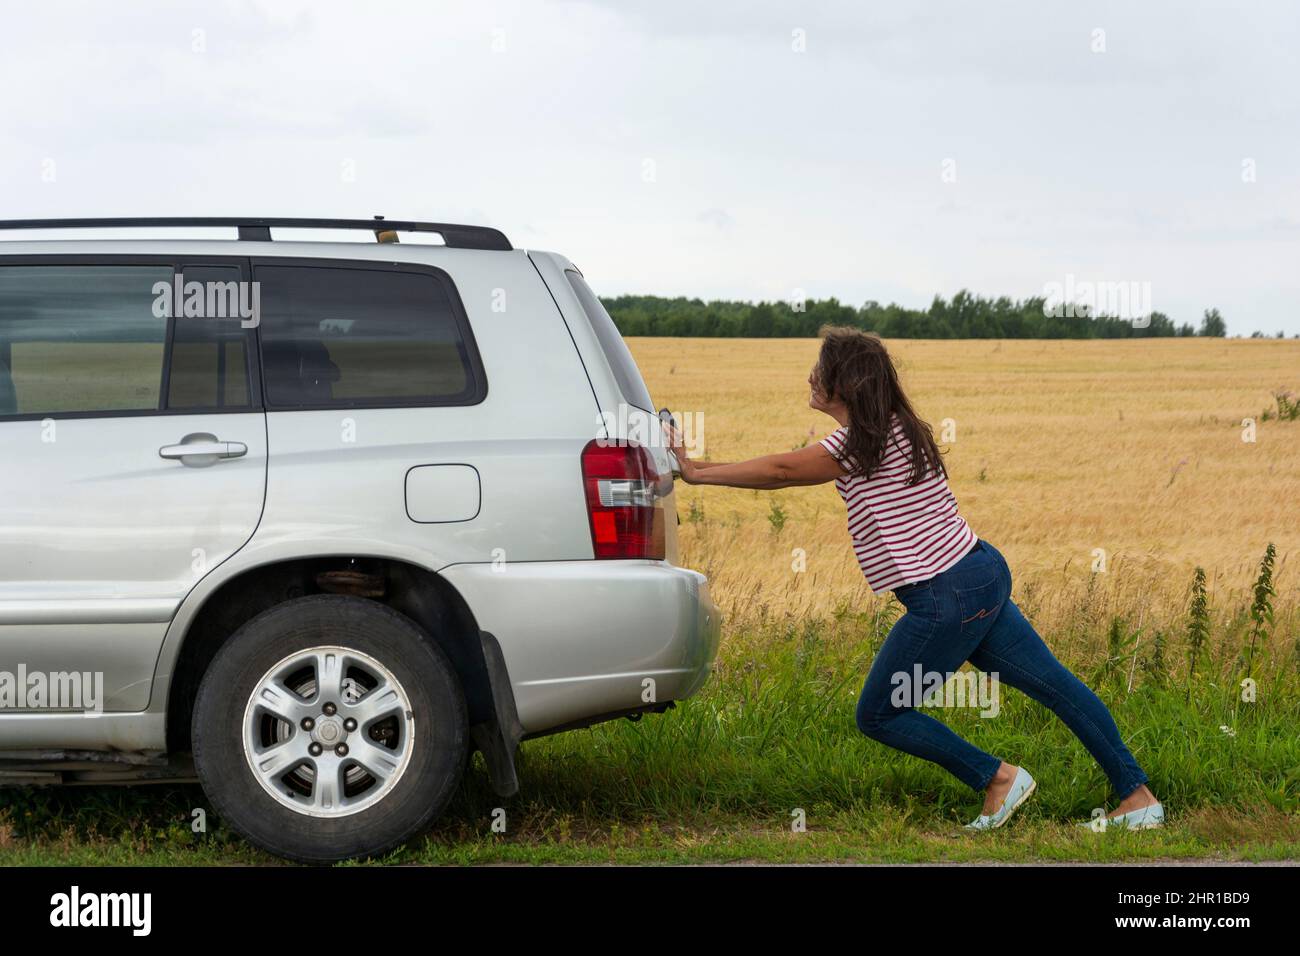 A broken car. A young woman pushes a broken car on the road, a breakdown, against the background of a yellow field. Stock Photo